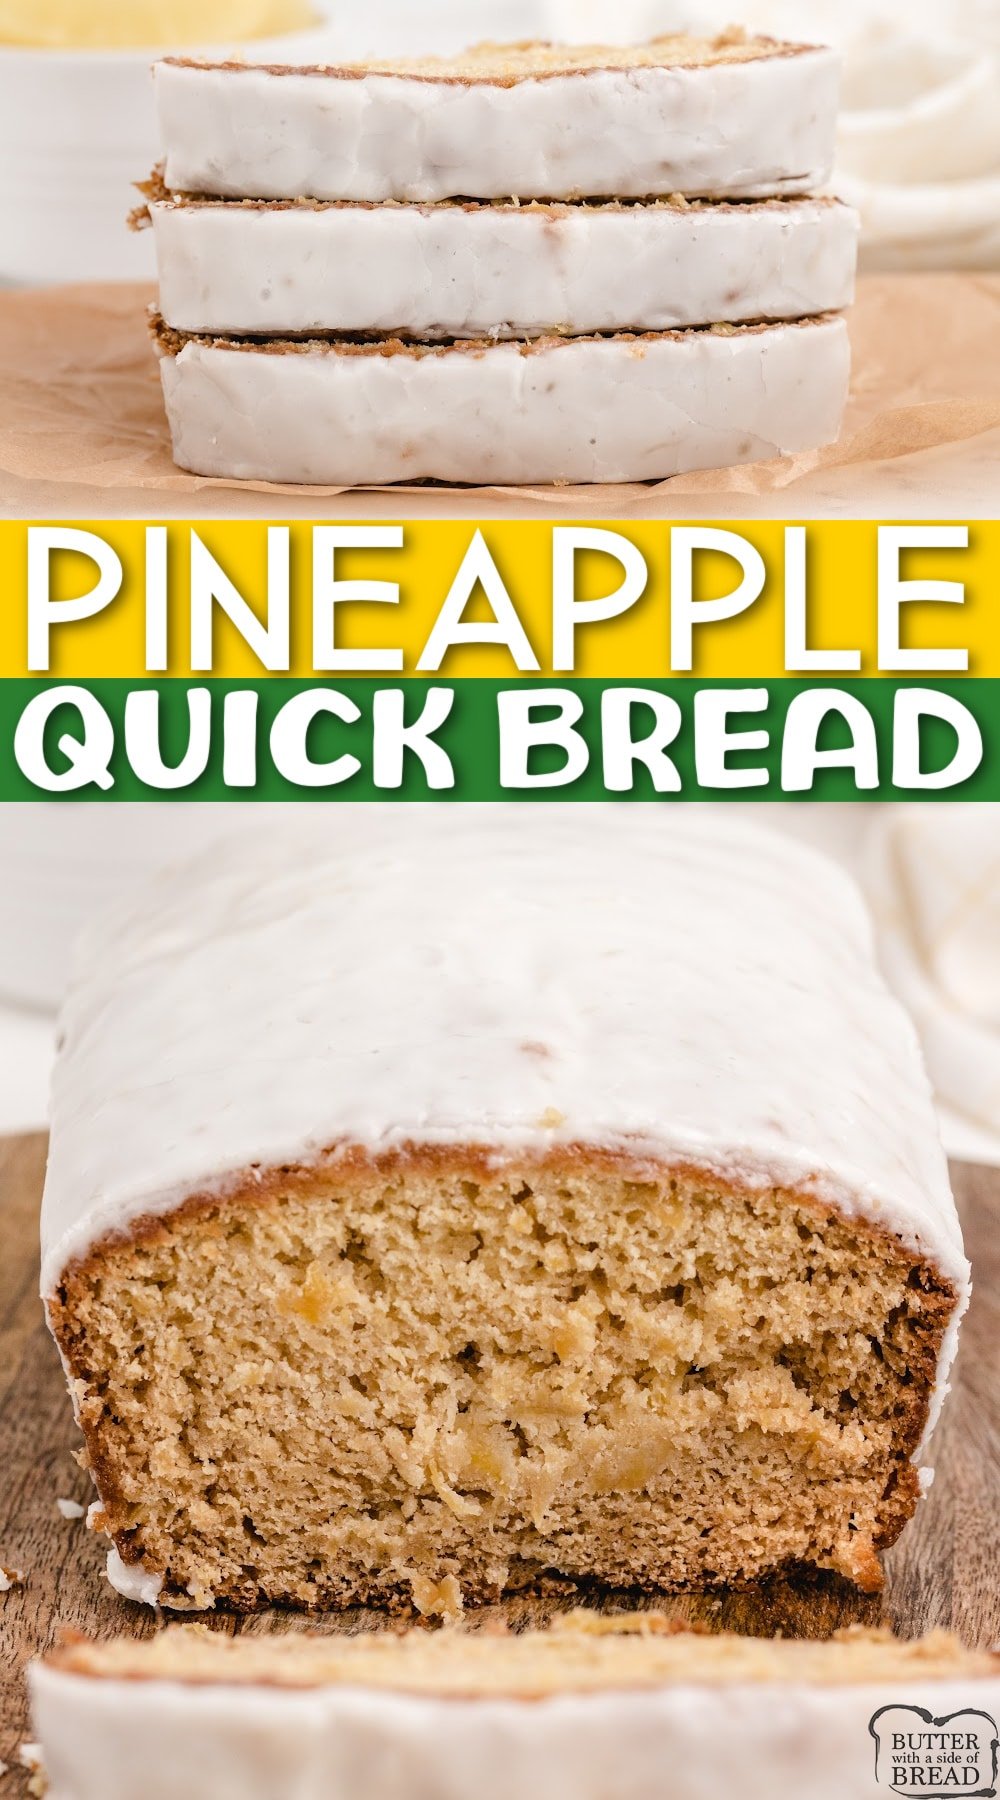 Pineapple Quick Bread is sweet, moist and absolutely delicious, especially with a simple pineapple glaze on top! This quick bread recipe is made with crushed pineapple, cream cheese, sour cream and a few other basic ingredients.